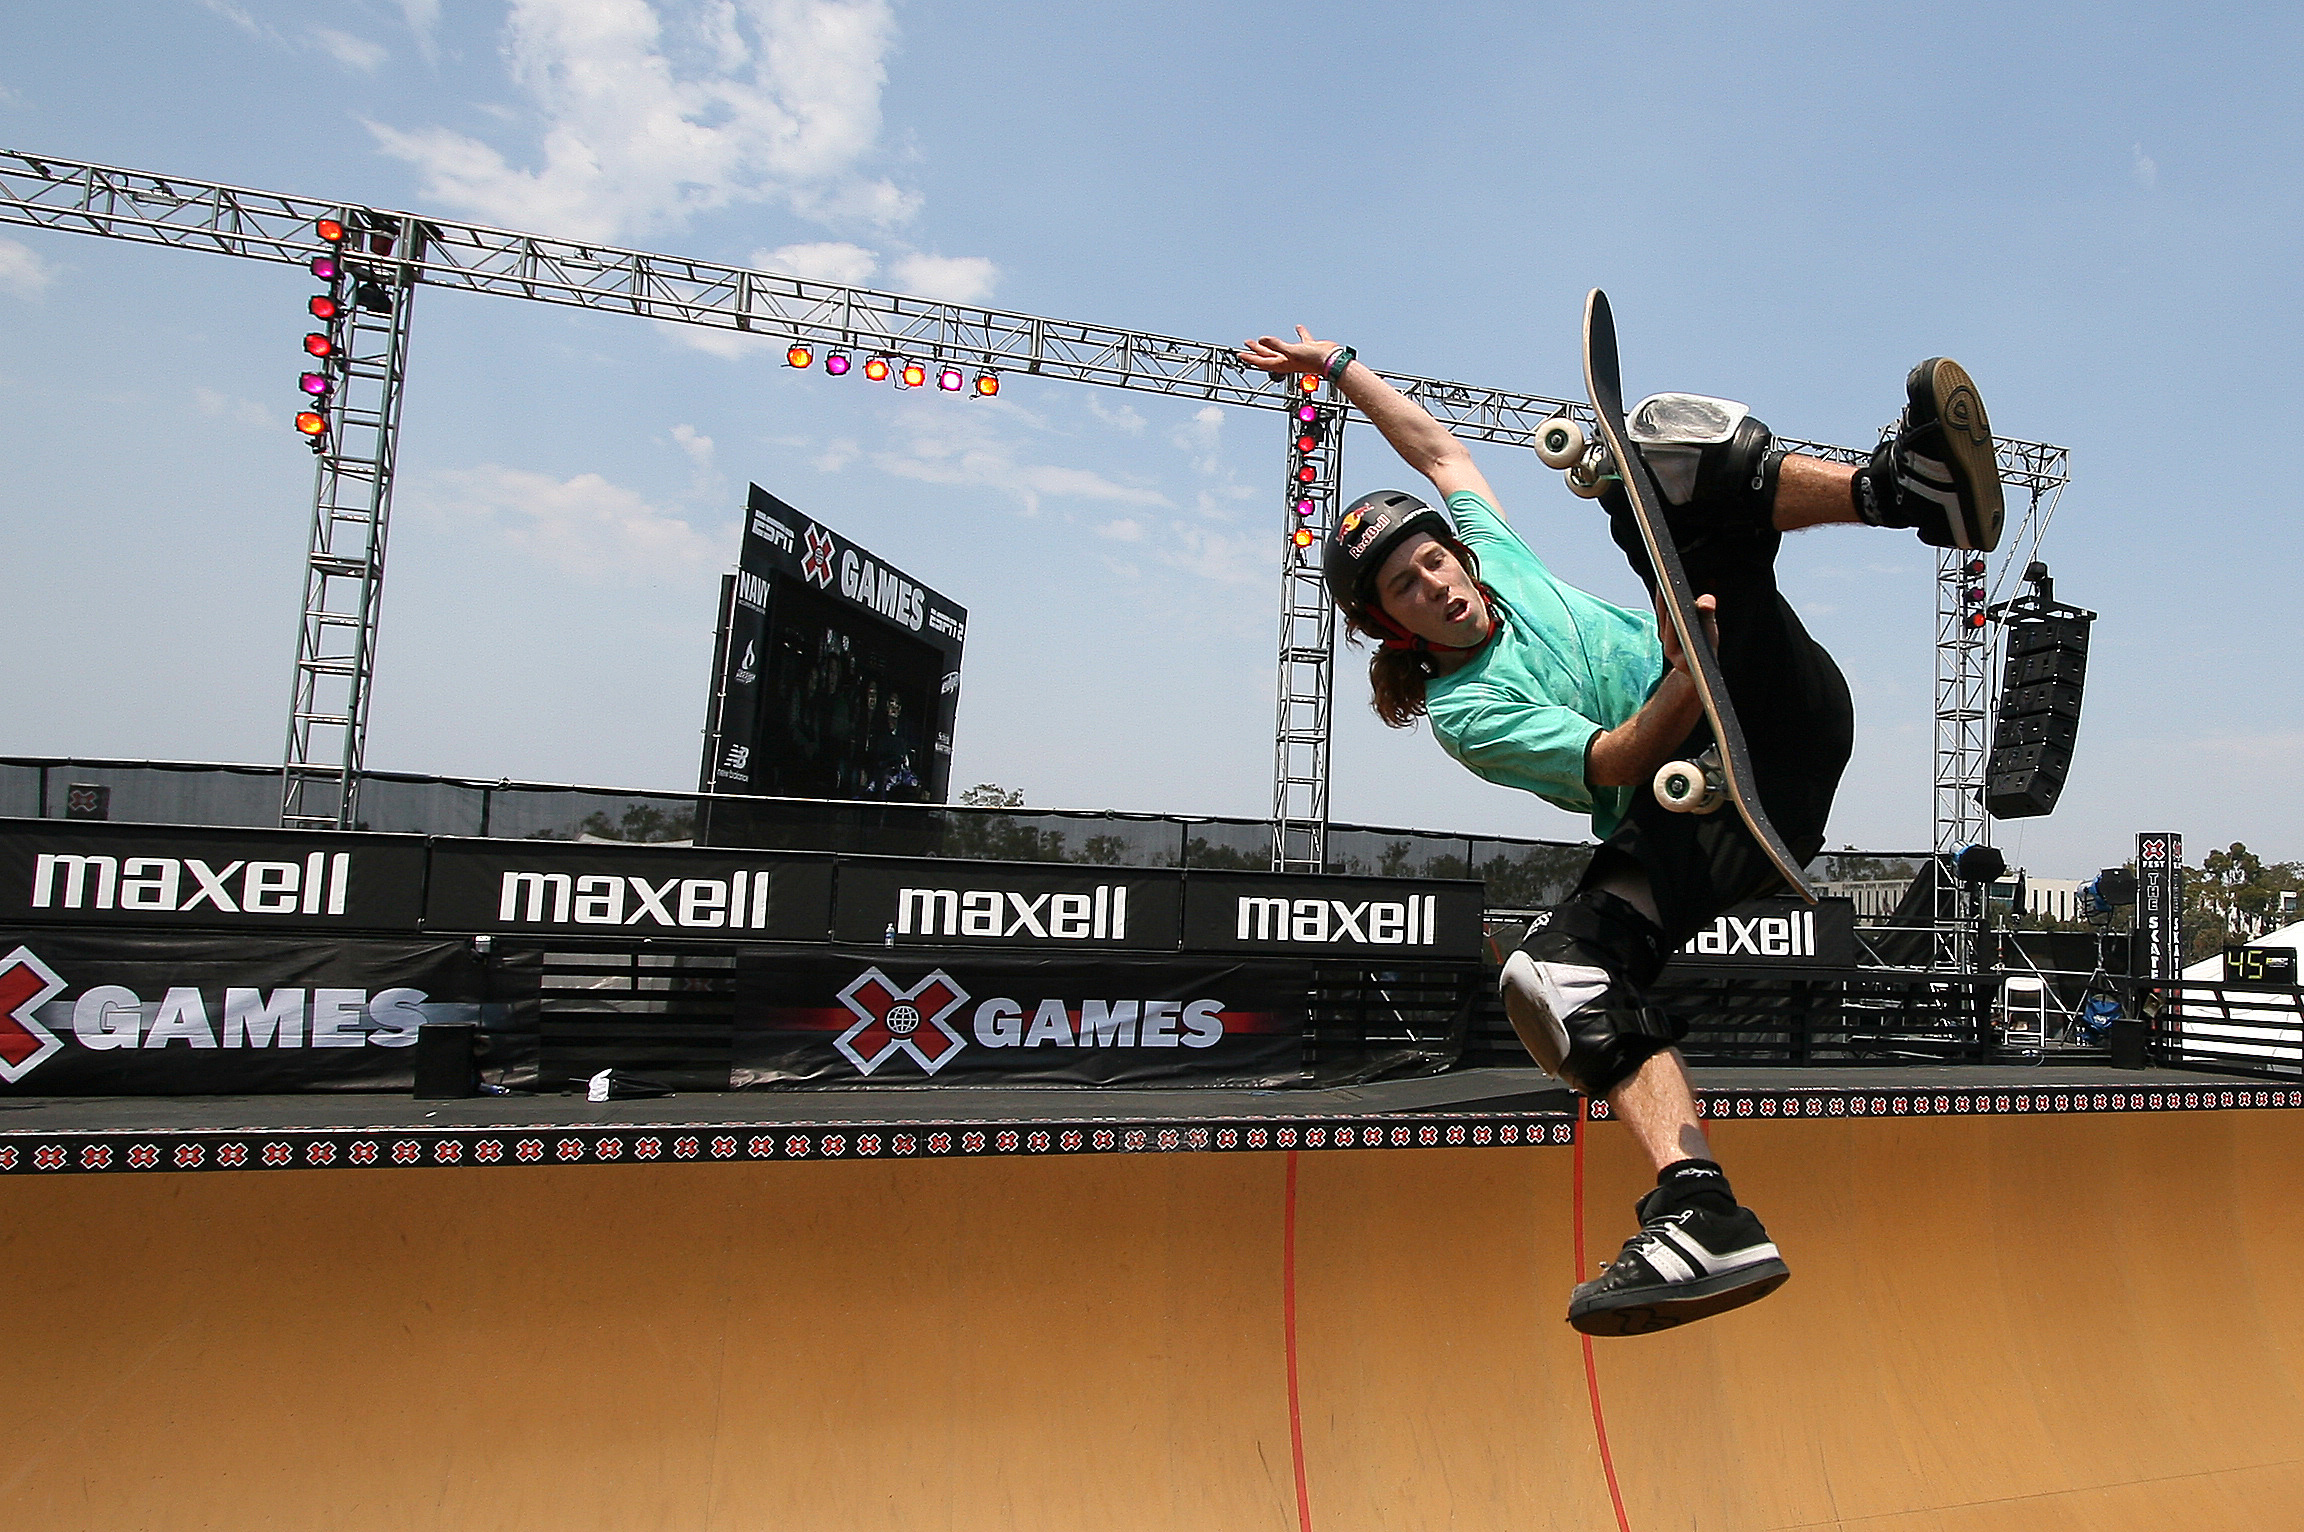 Skate Boarder Shaun White during the skate boarding event at the X games at the Home Depot Center in Los Angeles. Icon Sports Wire—Corbis via Getty Images (Icon Sports Wire—Corbis via Getty Images)